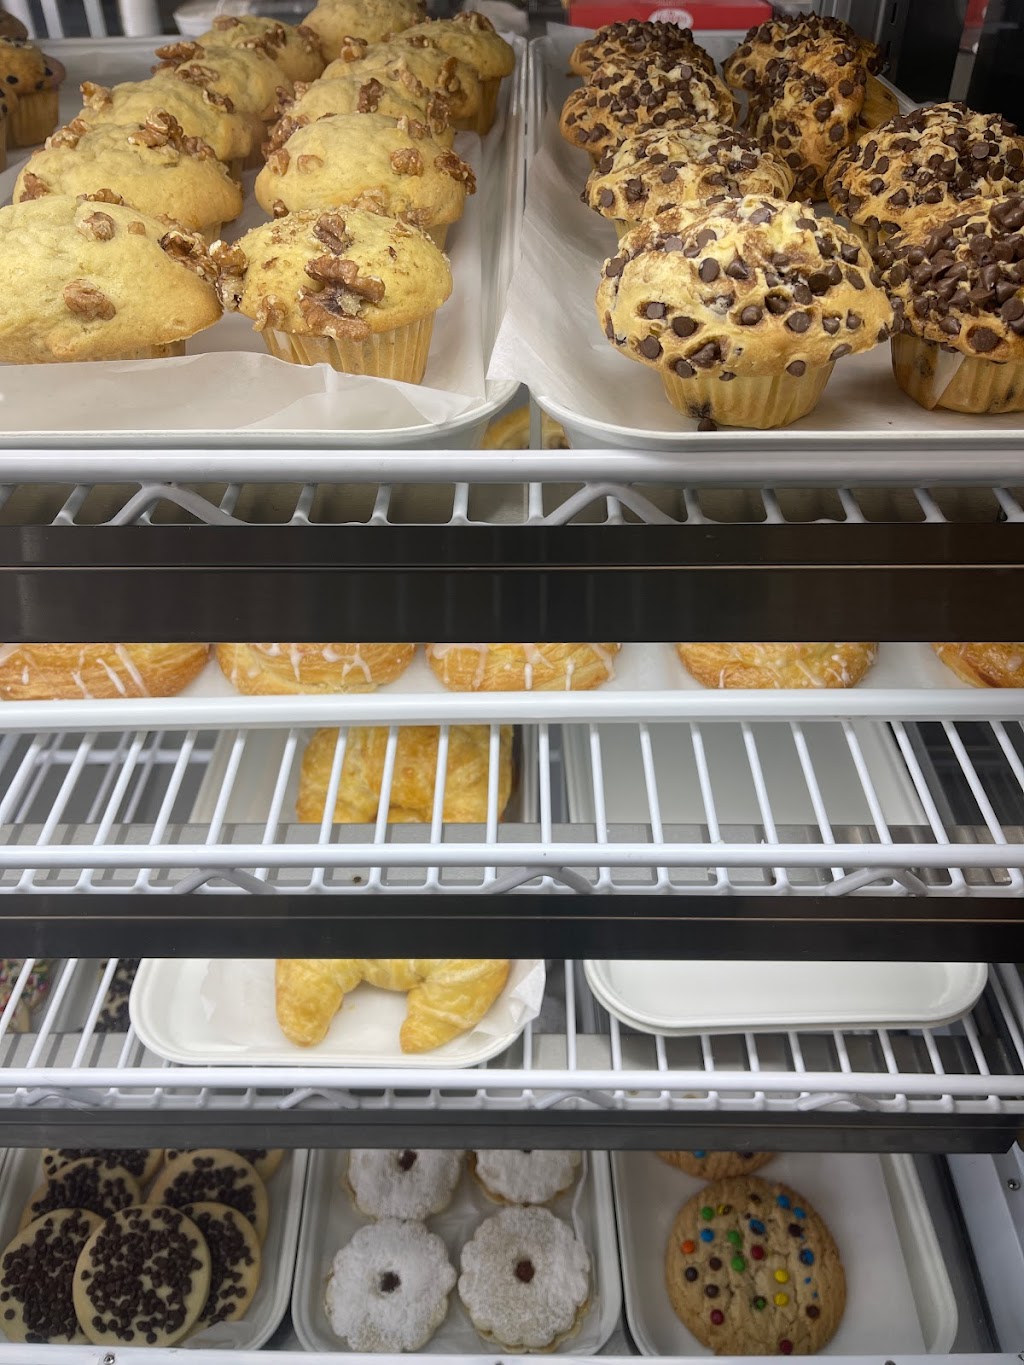 Bagel & Bakery Express | 634 Wantagh Ave, Levittown, NY 11756 | Phone: (516) 261-9627